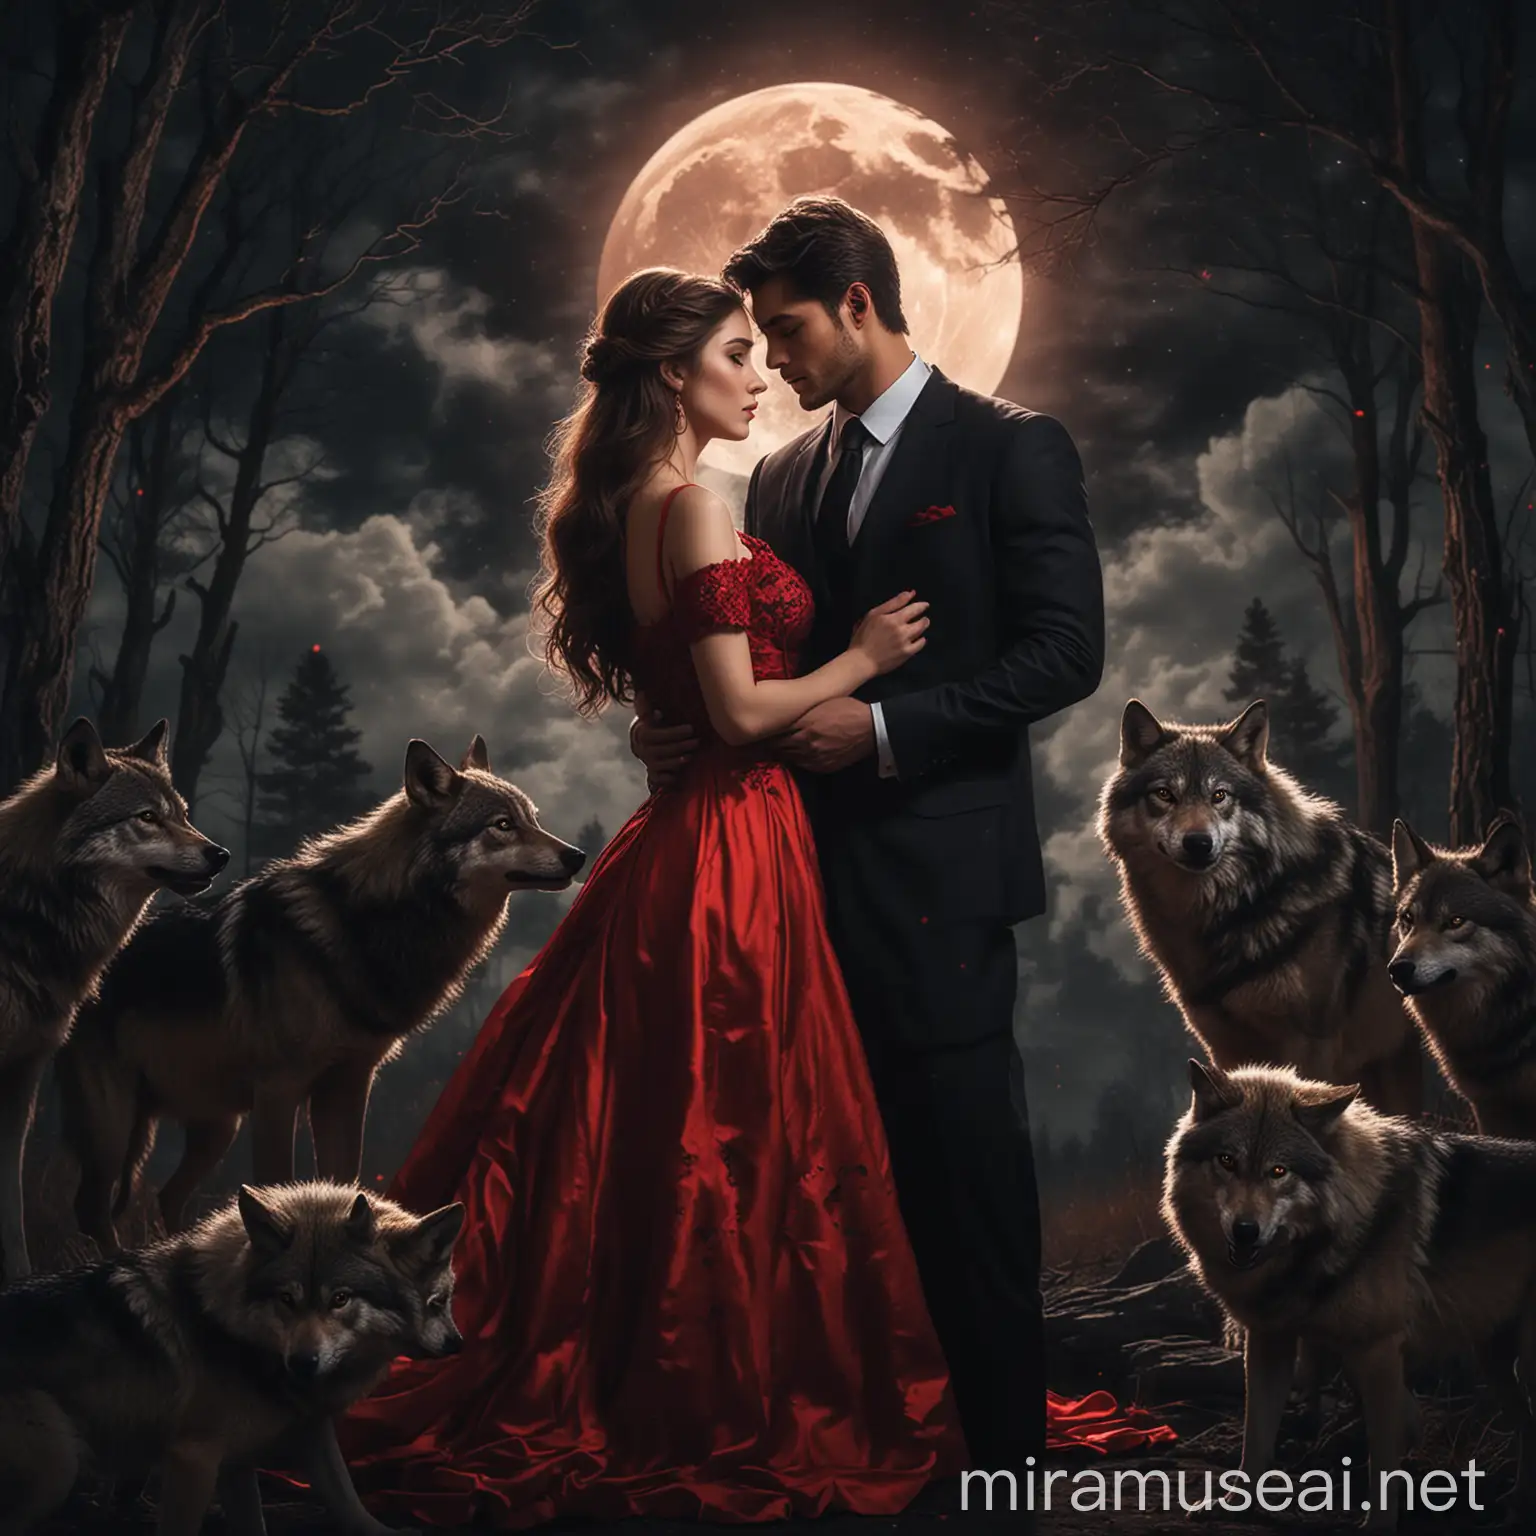 A beautiful lady in a red and black dress, held romantically by a handsome young man in suit, with wolves beside them, and a glowing moon in the dark night.